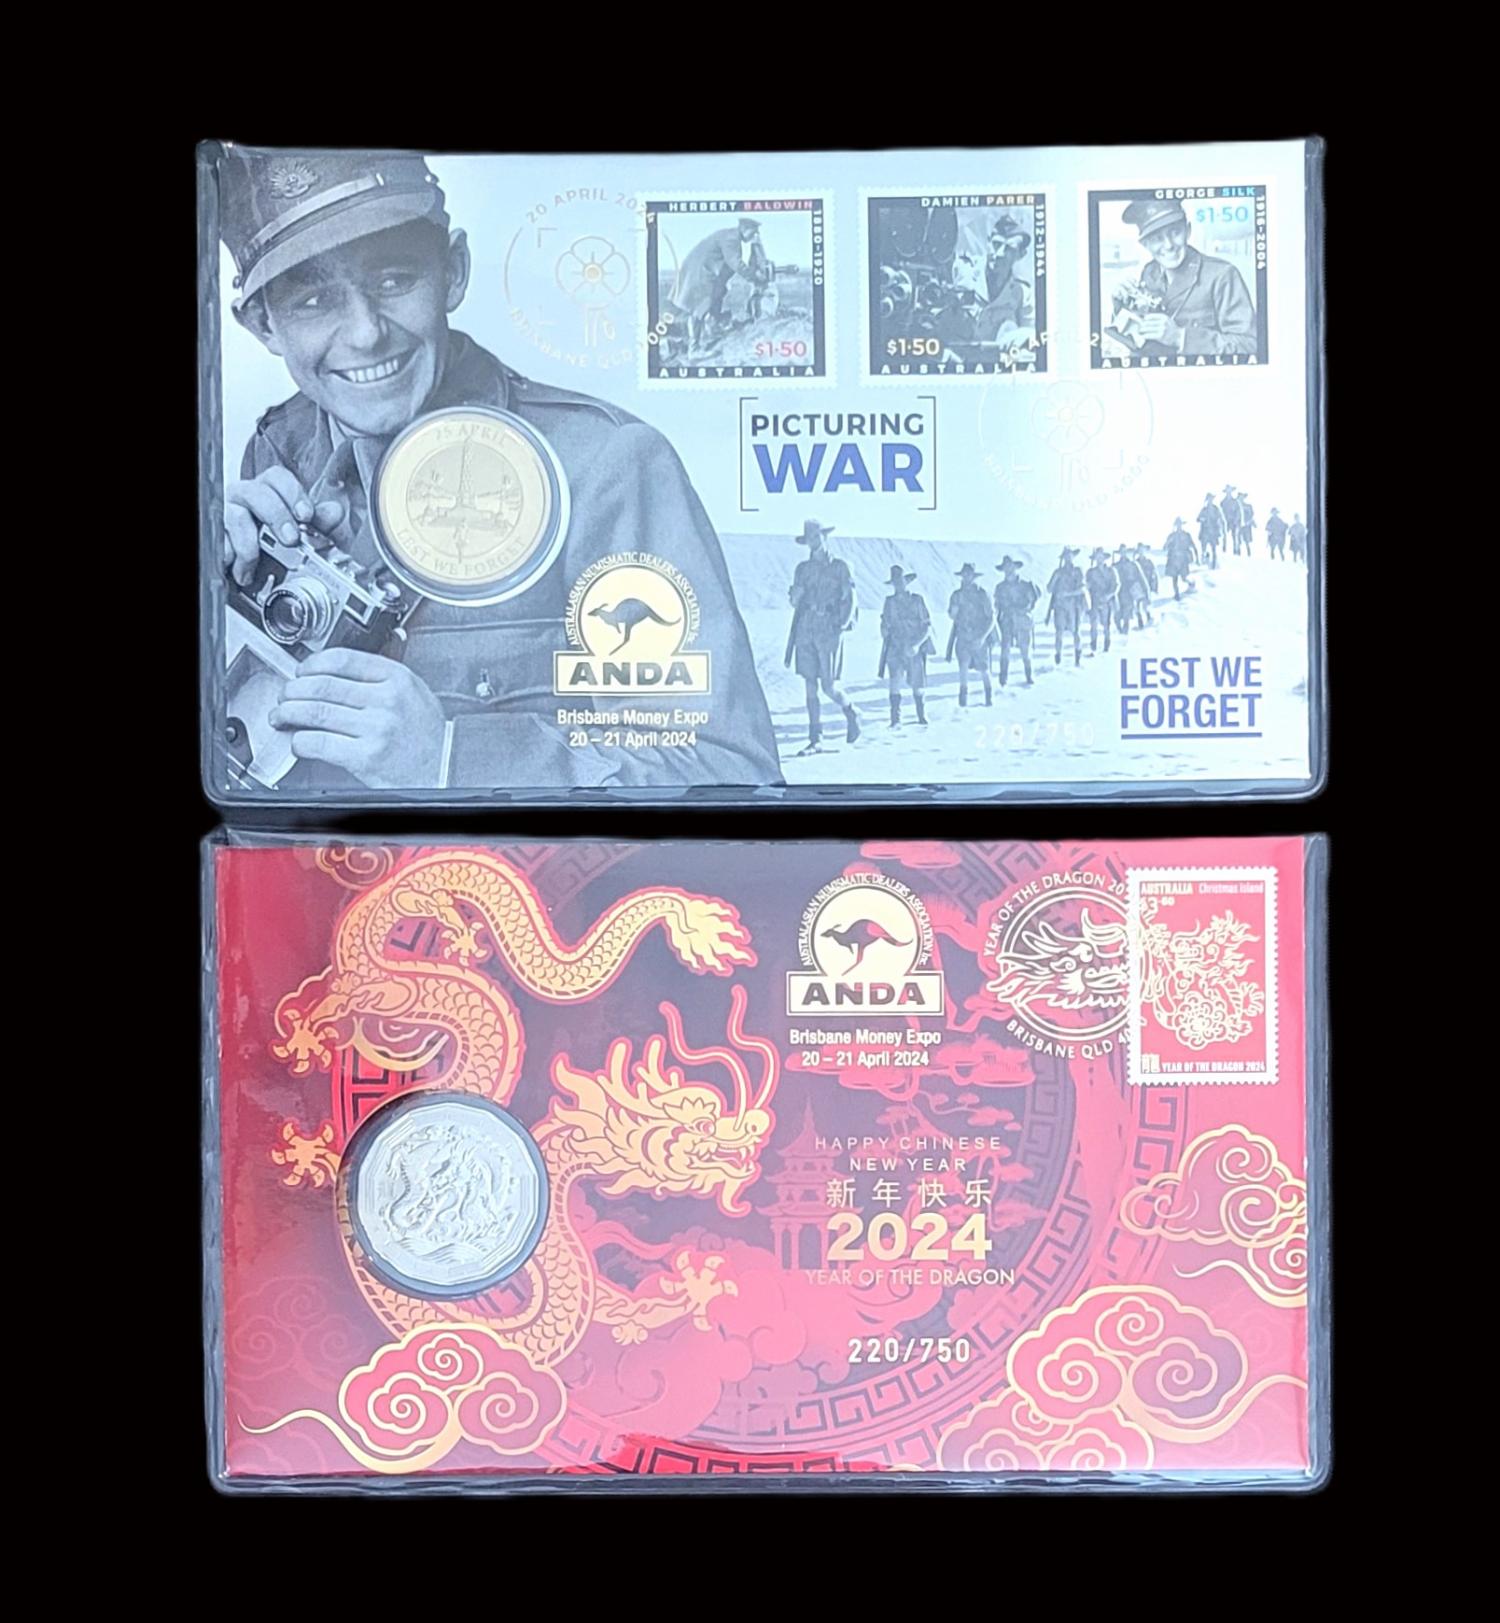 Thumbnail for 2024 PNC Duo - Issued for Brisbane Money Expo ANDA Show - Happy Chinese New Year 2024 Year of the Dragon RAM 50 cent Coin & Perth Mint Picturing War Lest we Forget with $1 coin PNCs 220-750